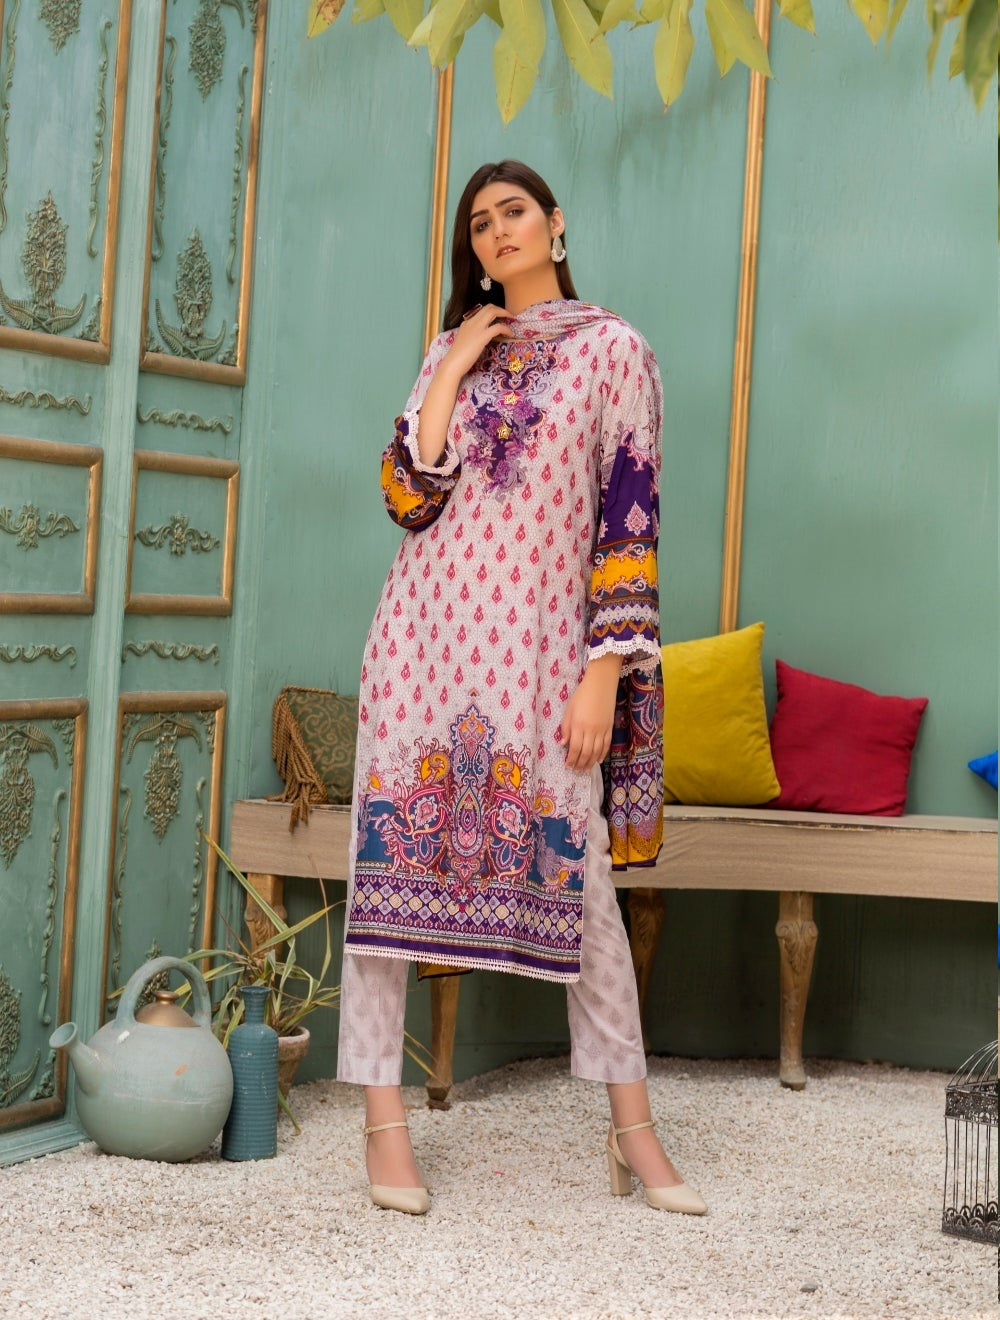 Ittehad Crystal Printed Lawn Unstitched 3 Piece Suit - LF-CL-21137A - Summer Collection